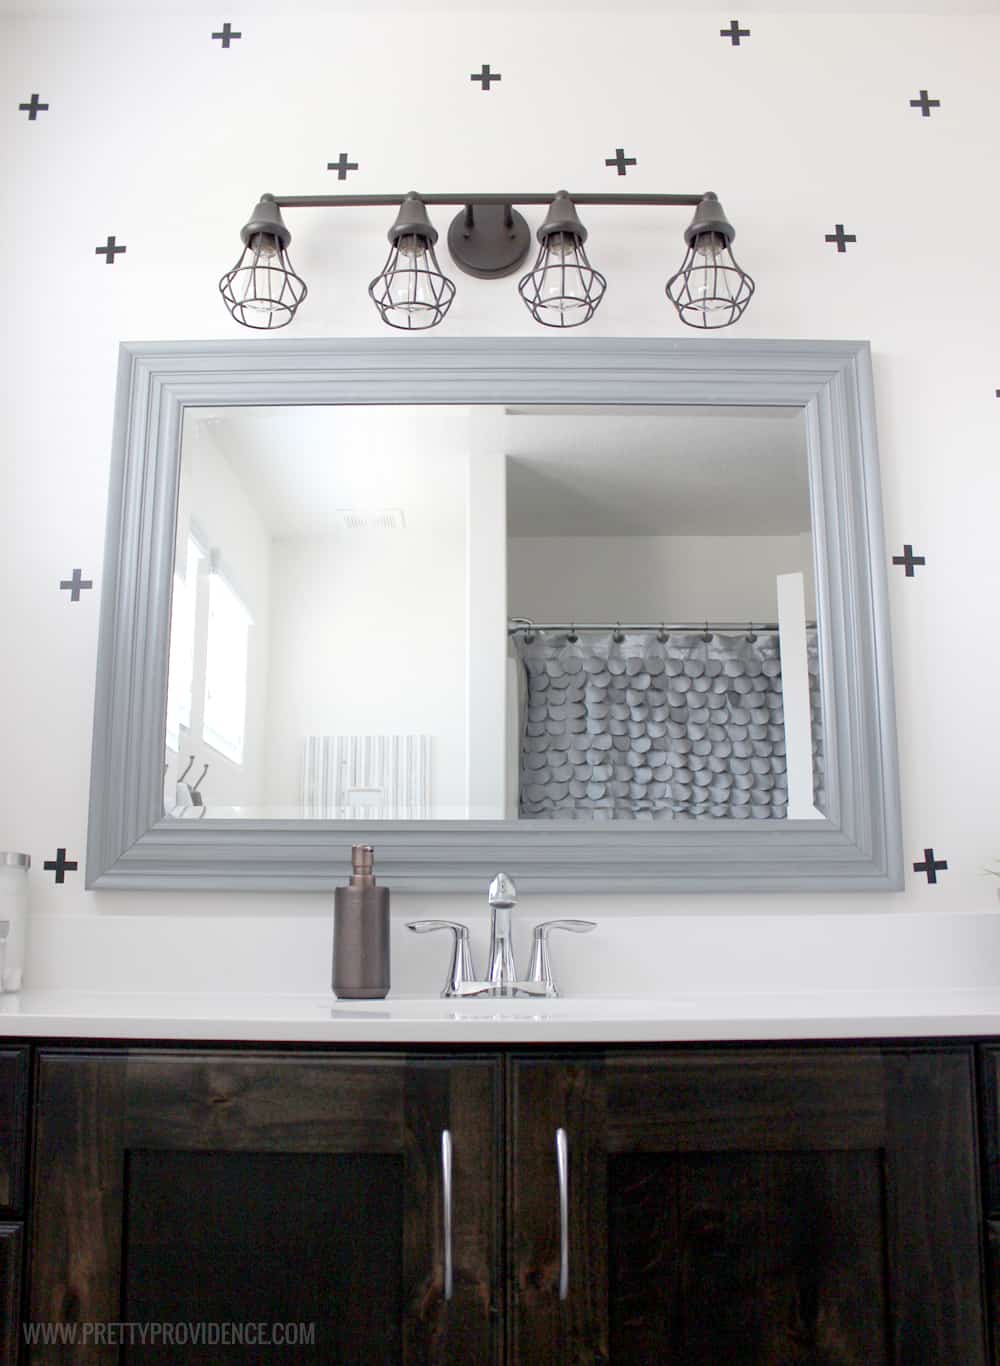 A super fun and easy boys bathroom makeover! on a budget! I can't believe how easy those wall decals were to apply! 